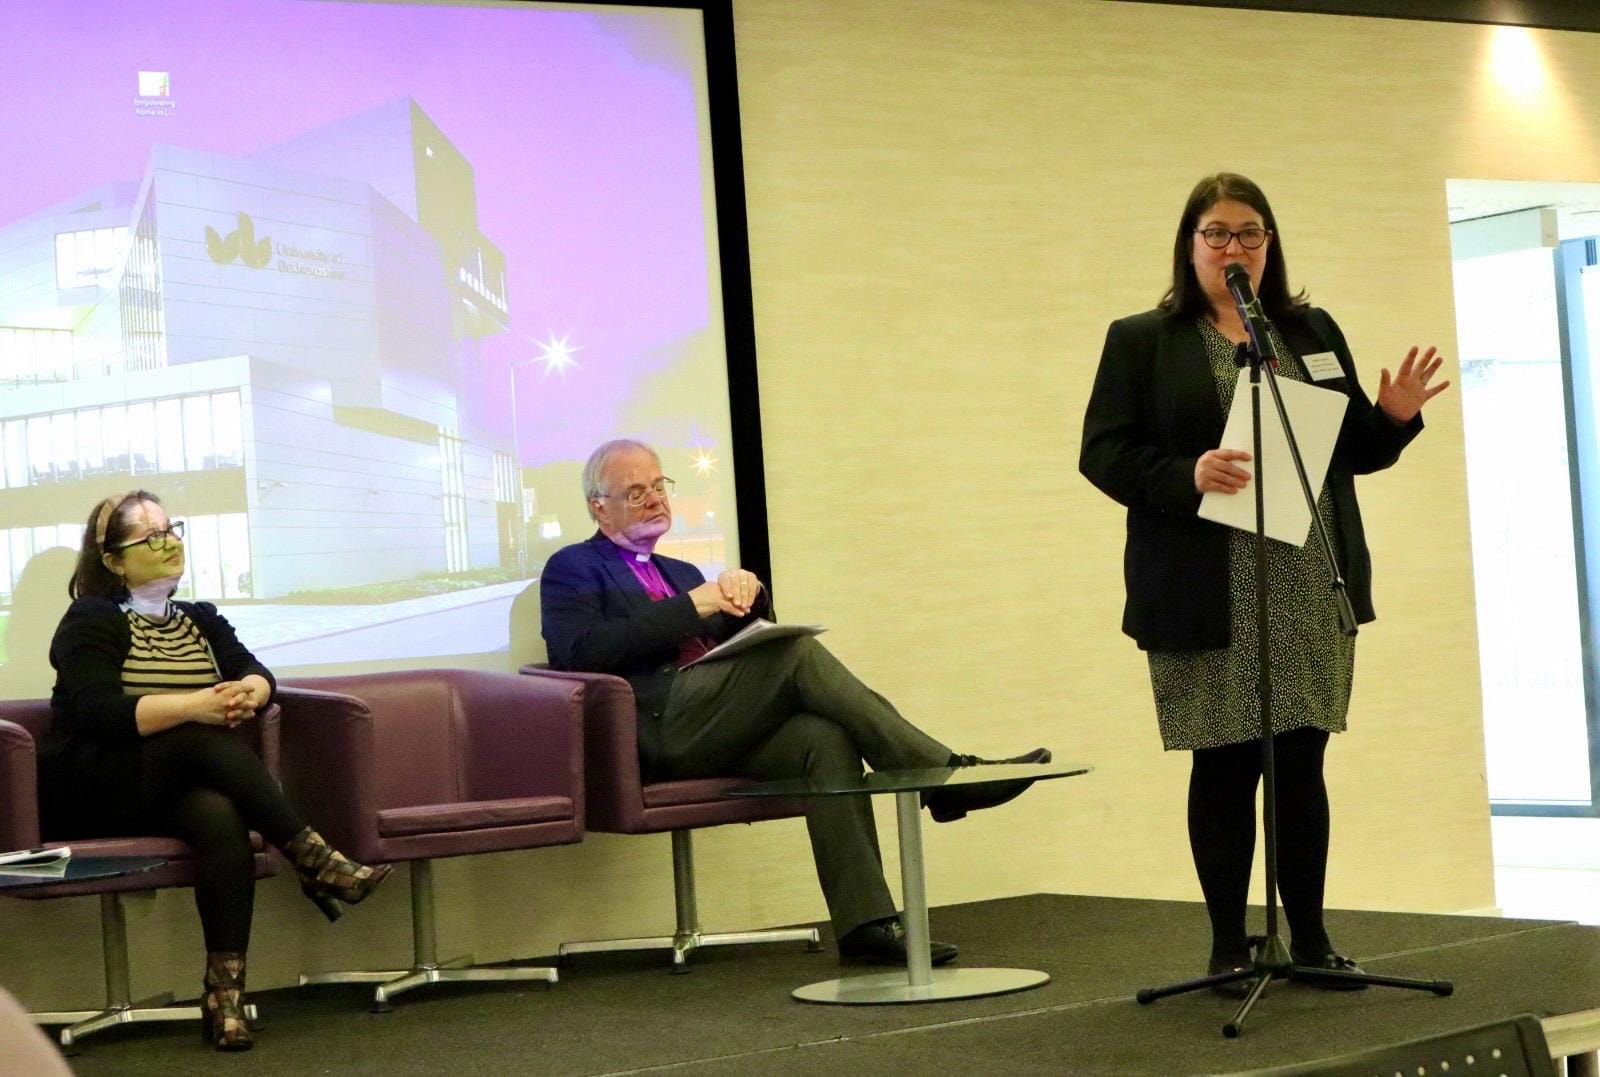 Rachel speaking at the event, alongside the Bishop of Bedford and Crina Morteanu, manager of Luton Roma Trust